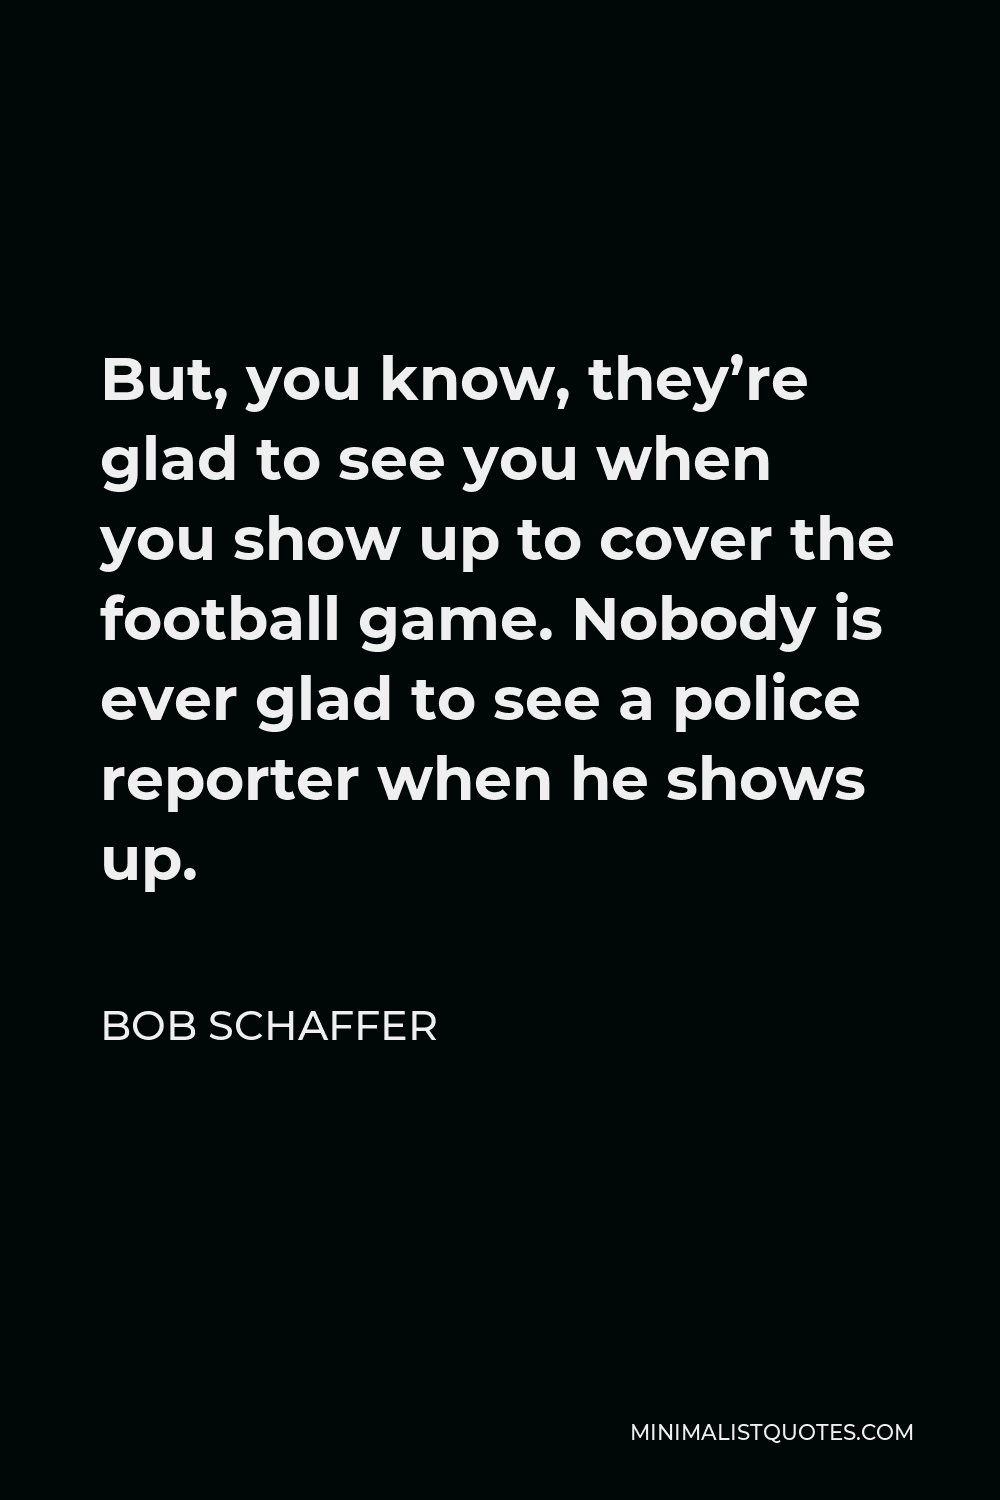 Bob Schaffer Quote - But, you know, they’re glad to see you when you show up to cover the football game. Nobody is ever glad to see a police reporter when he shows up.